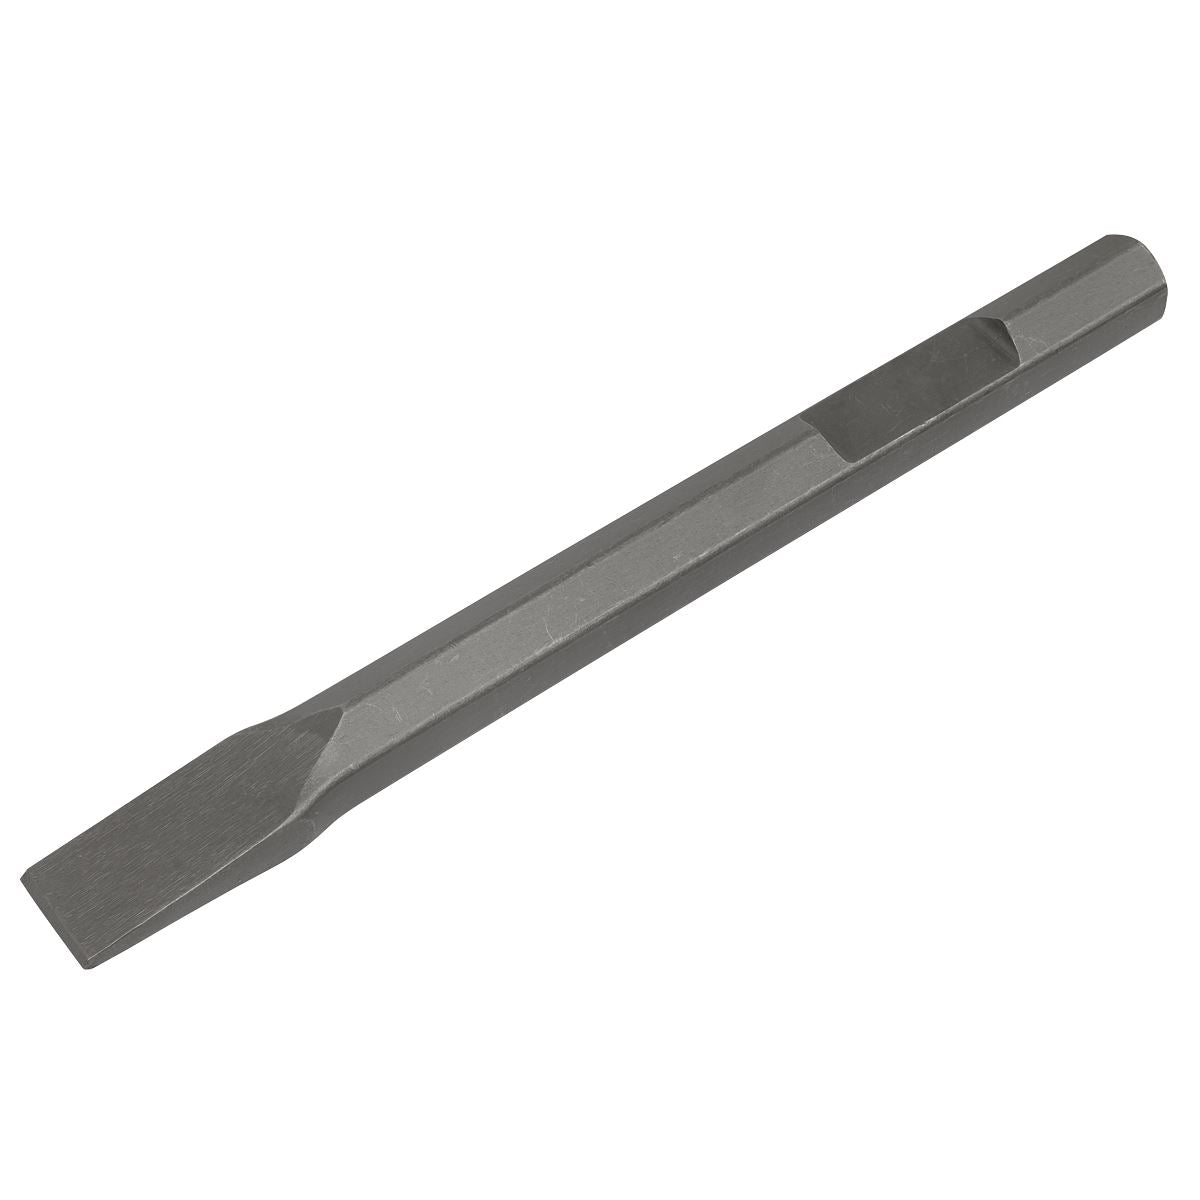 Worksafe by Sealey Chisel 30 x 375mm - Bosch 11304